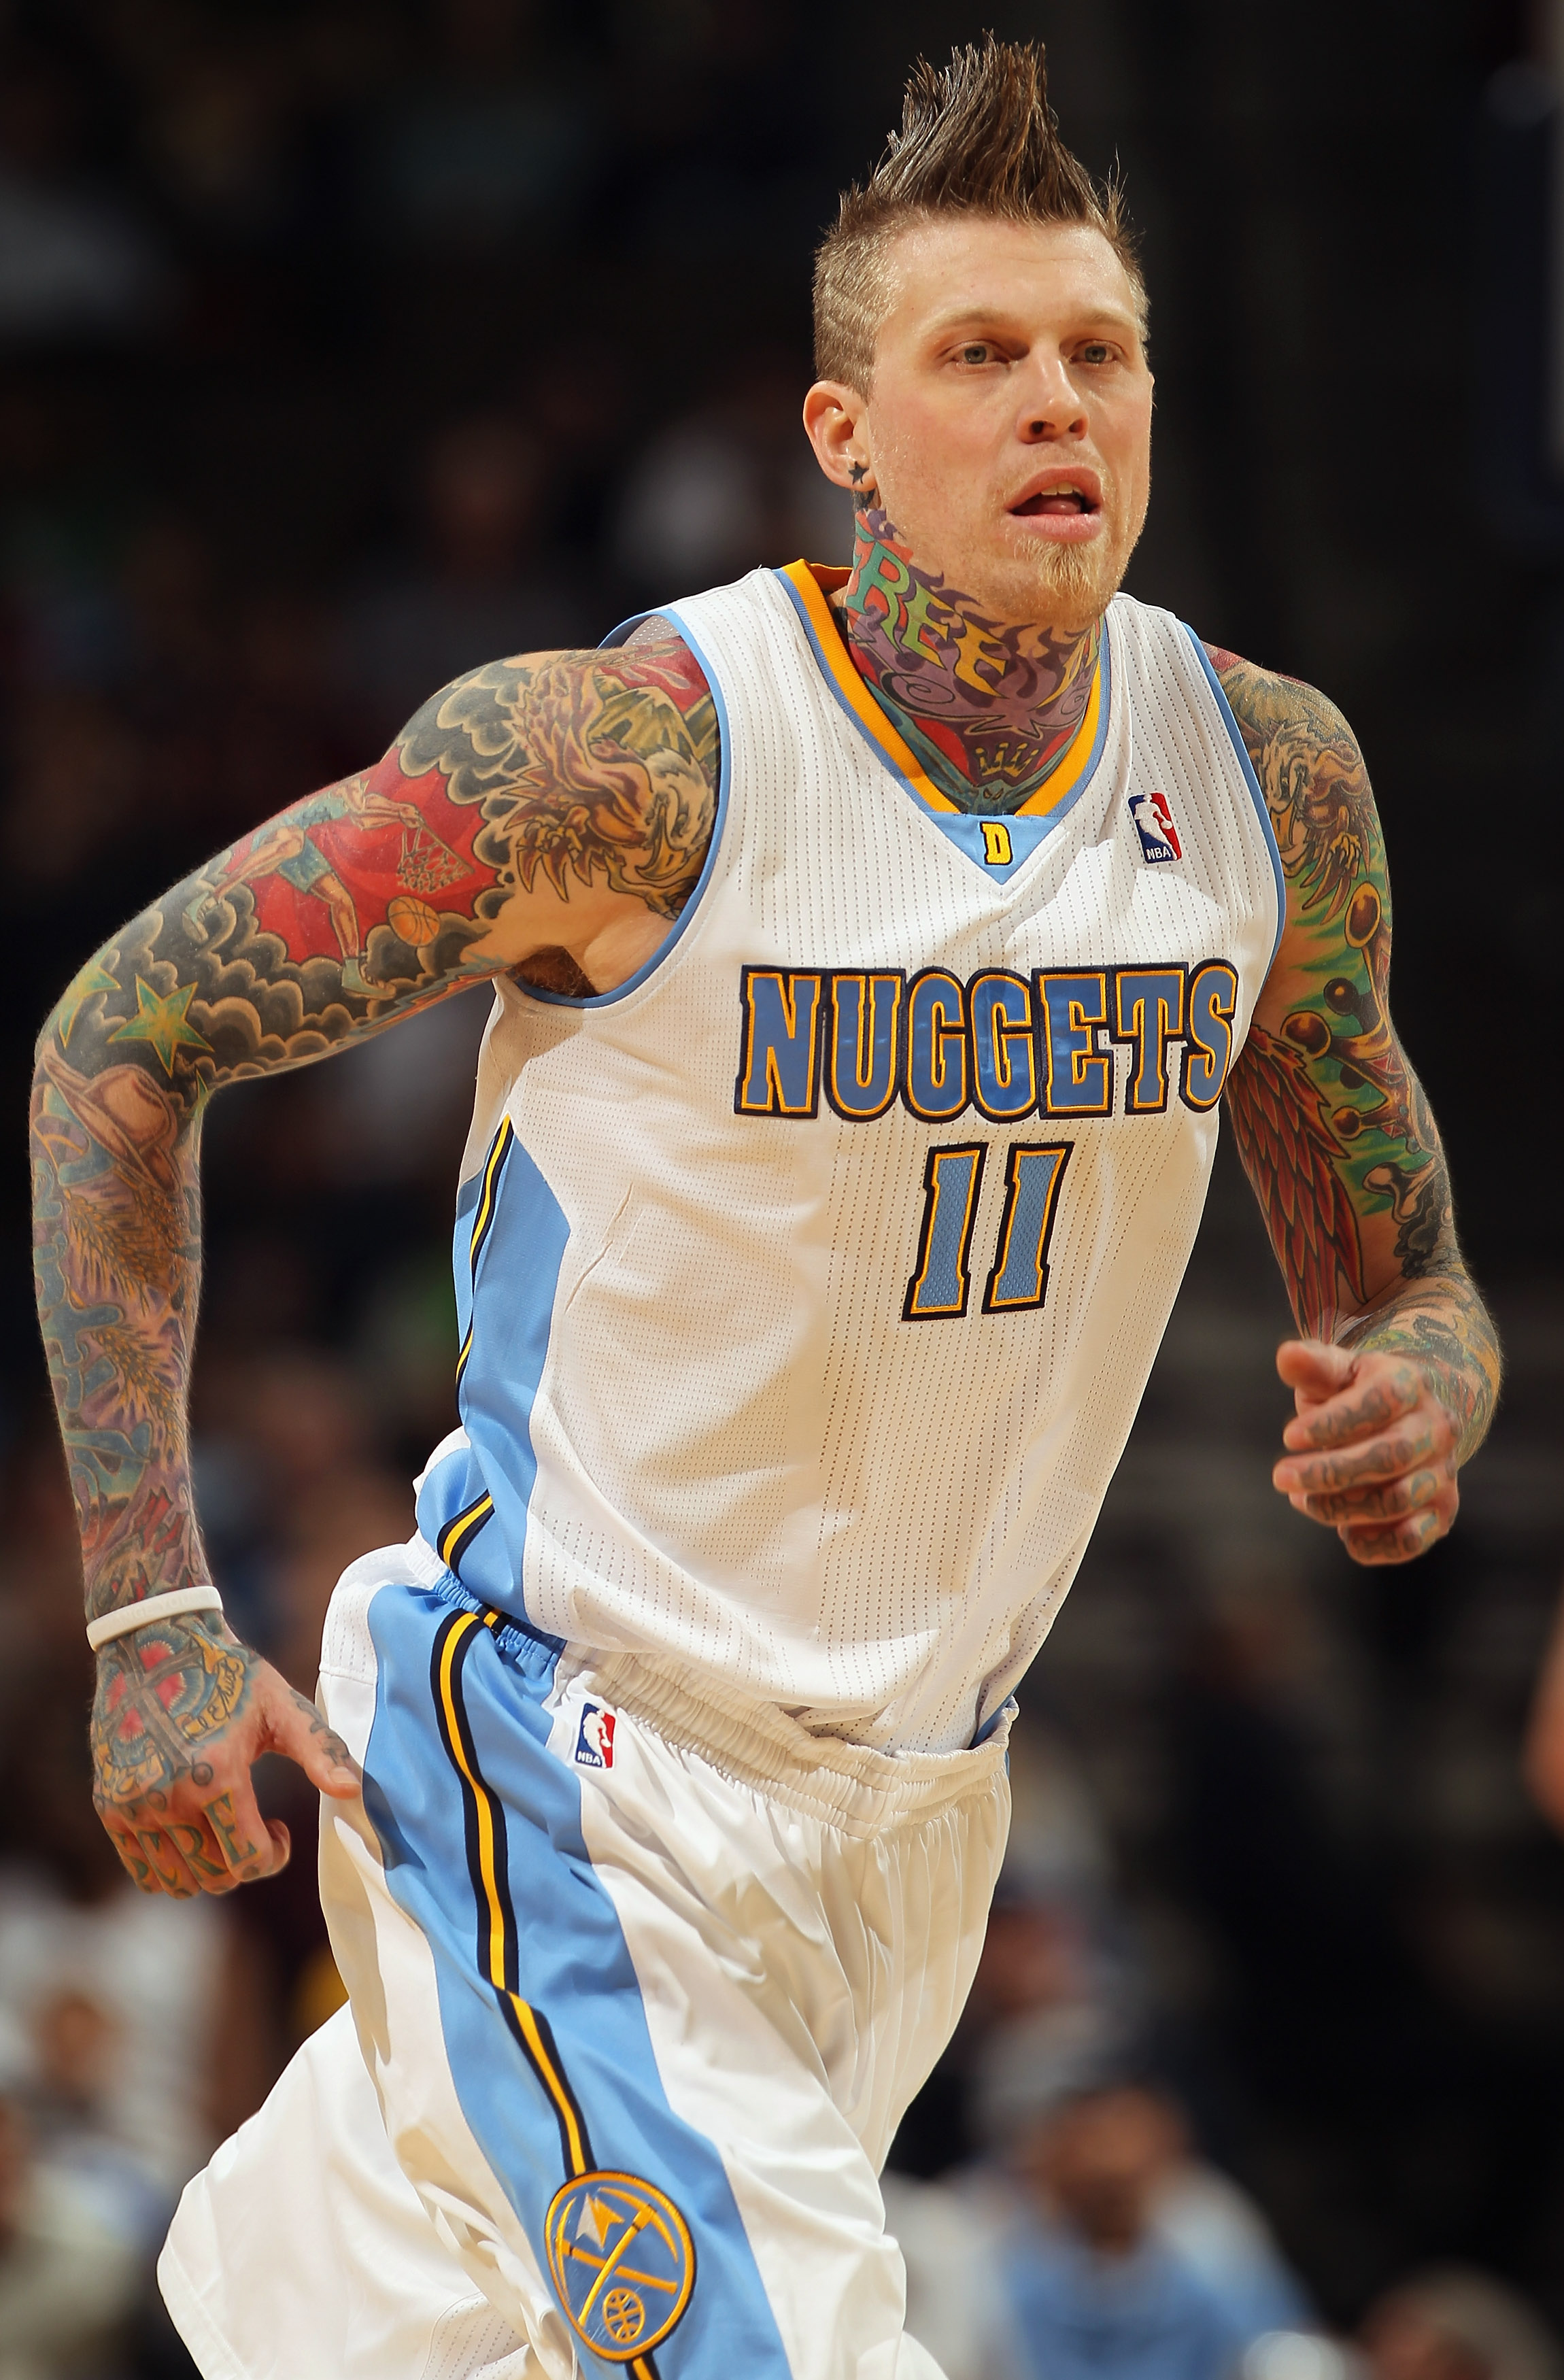 DENVER - DECEMBER 28:  Chris Andersen #11 of the Denver Nuggets runs upcourt against the Portland Trail Blazers at Pepsi Center on December 28, 2010 in Denver, Colorado. The Nuggets defeated the Blazers 95-77. NOTE TO USER: User expressly acknowledges and